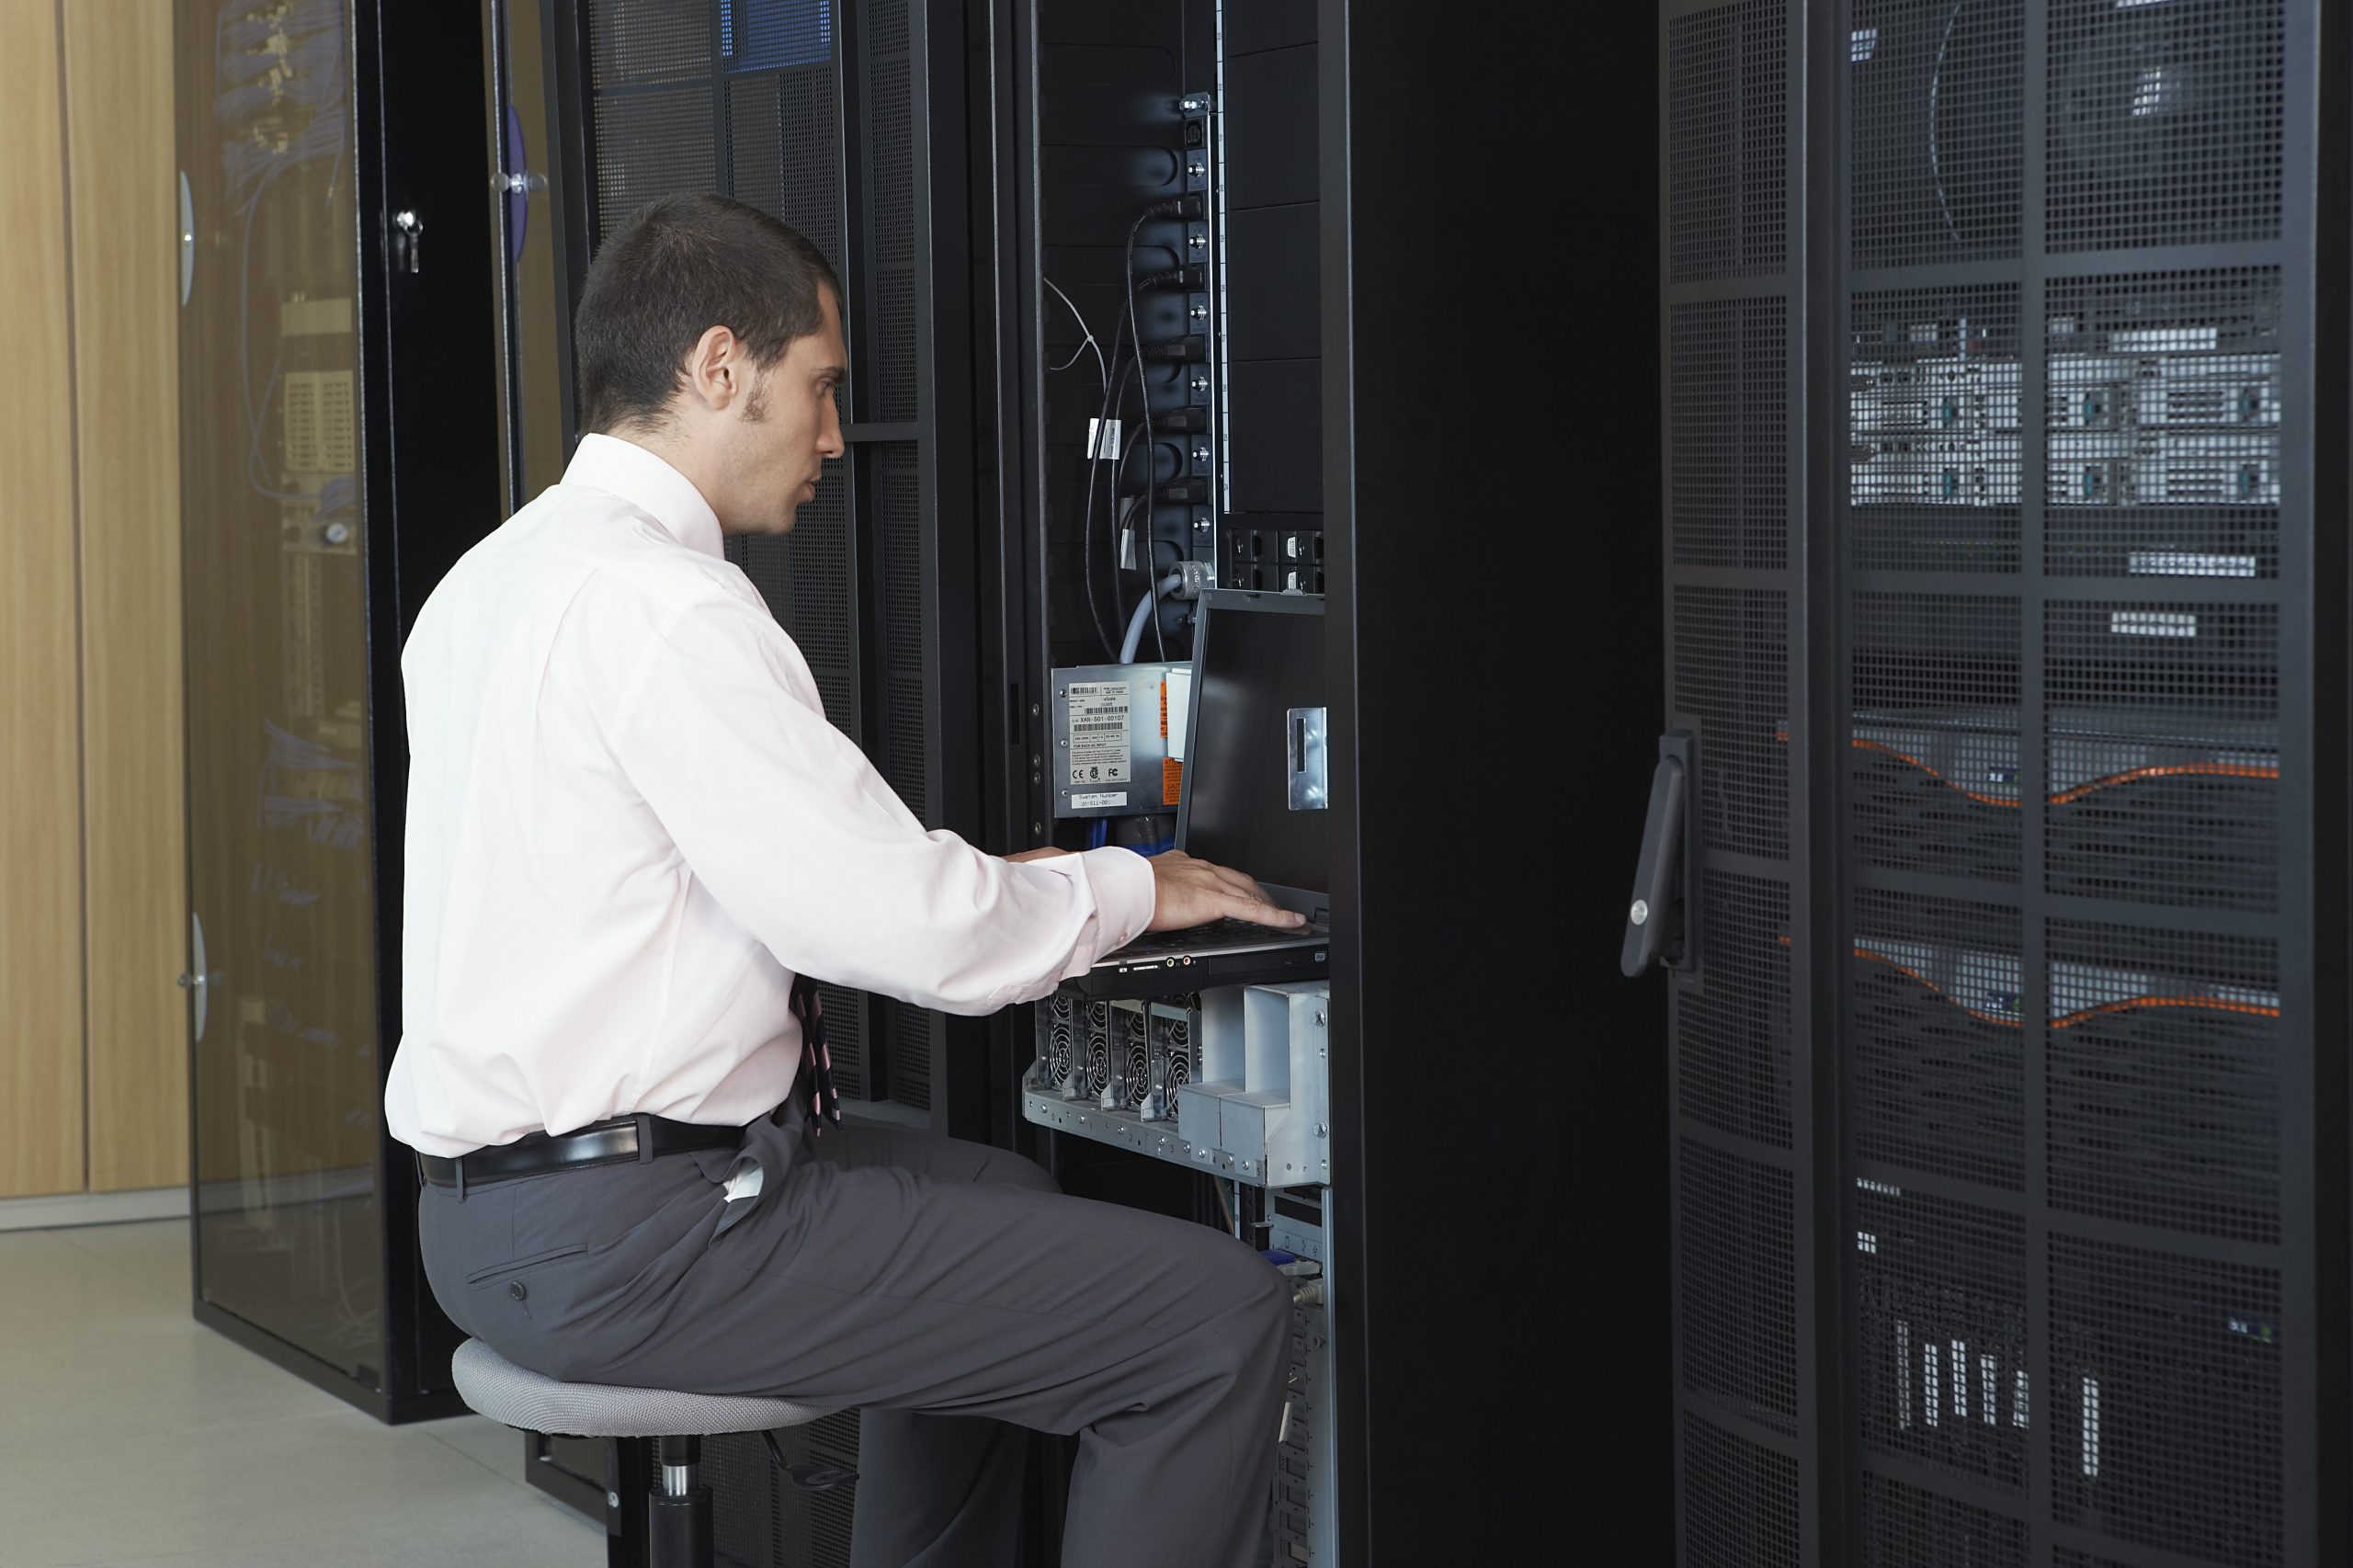 A person is sat infront of a metal rack of servers within a datacenter.